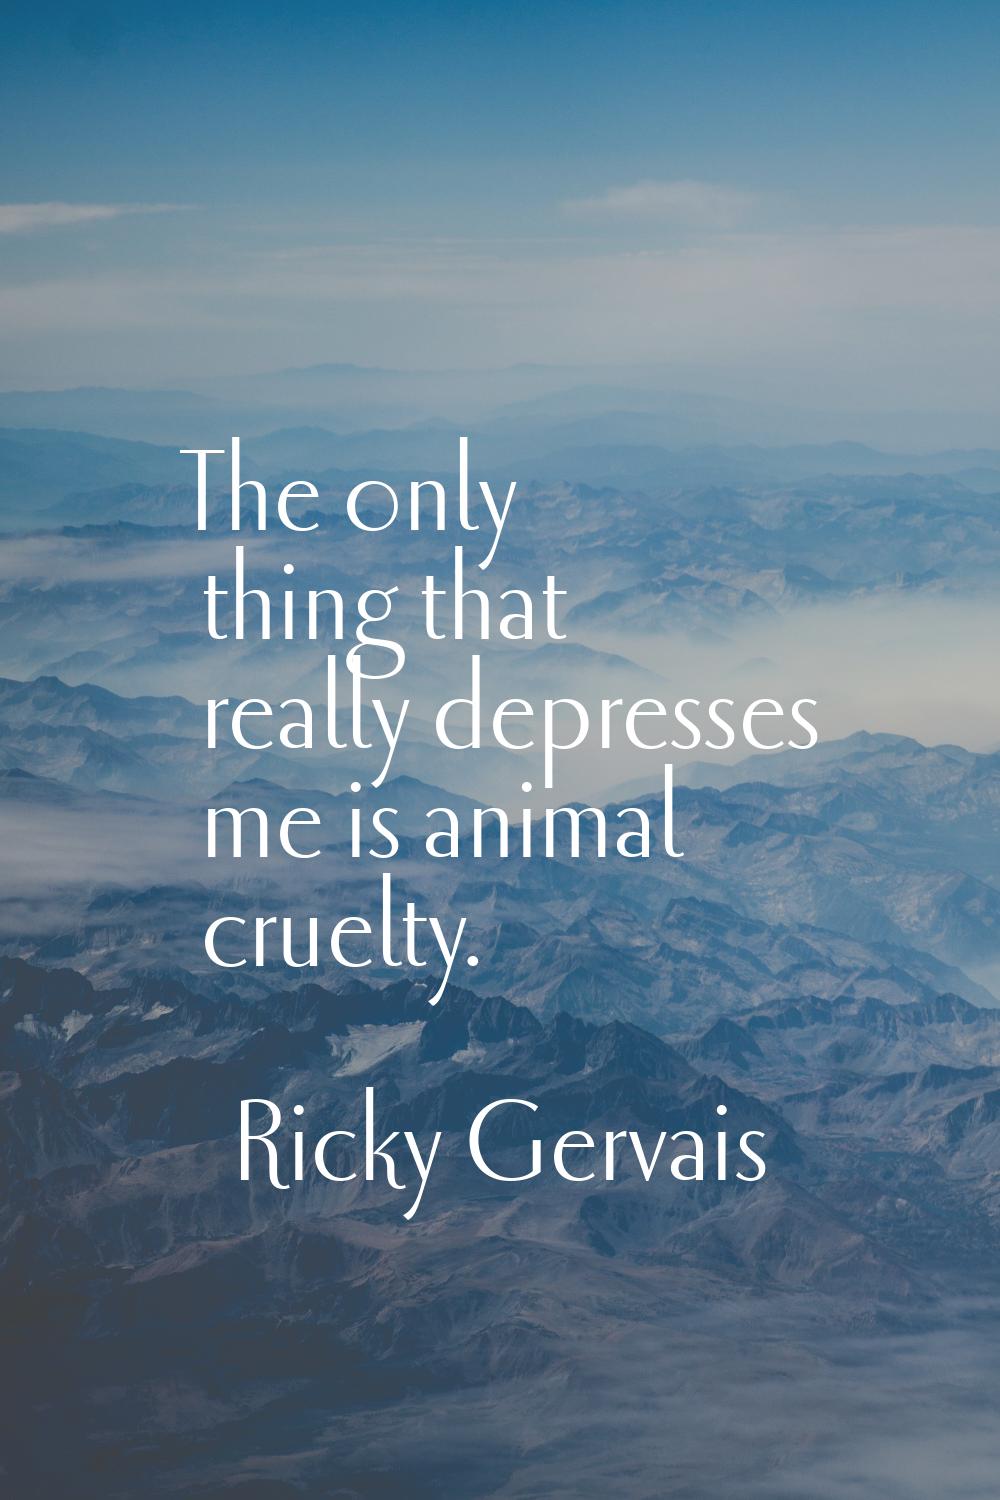 The only thing that really depresses me is animal cruelty.